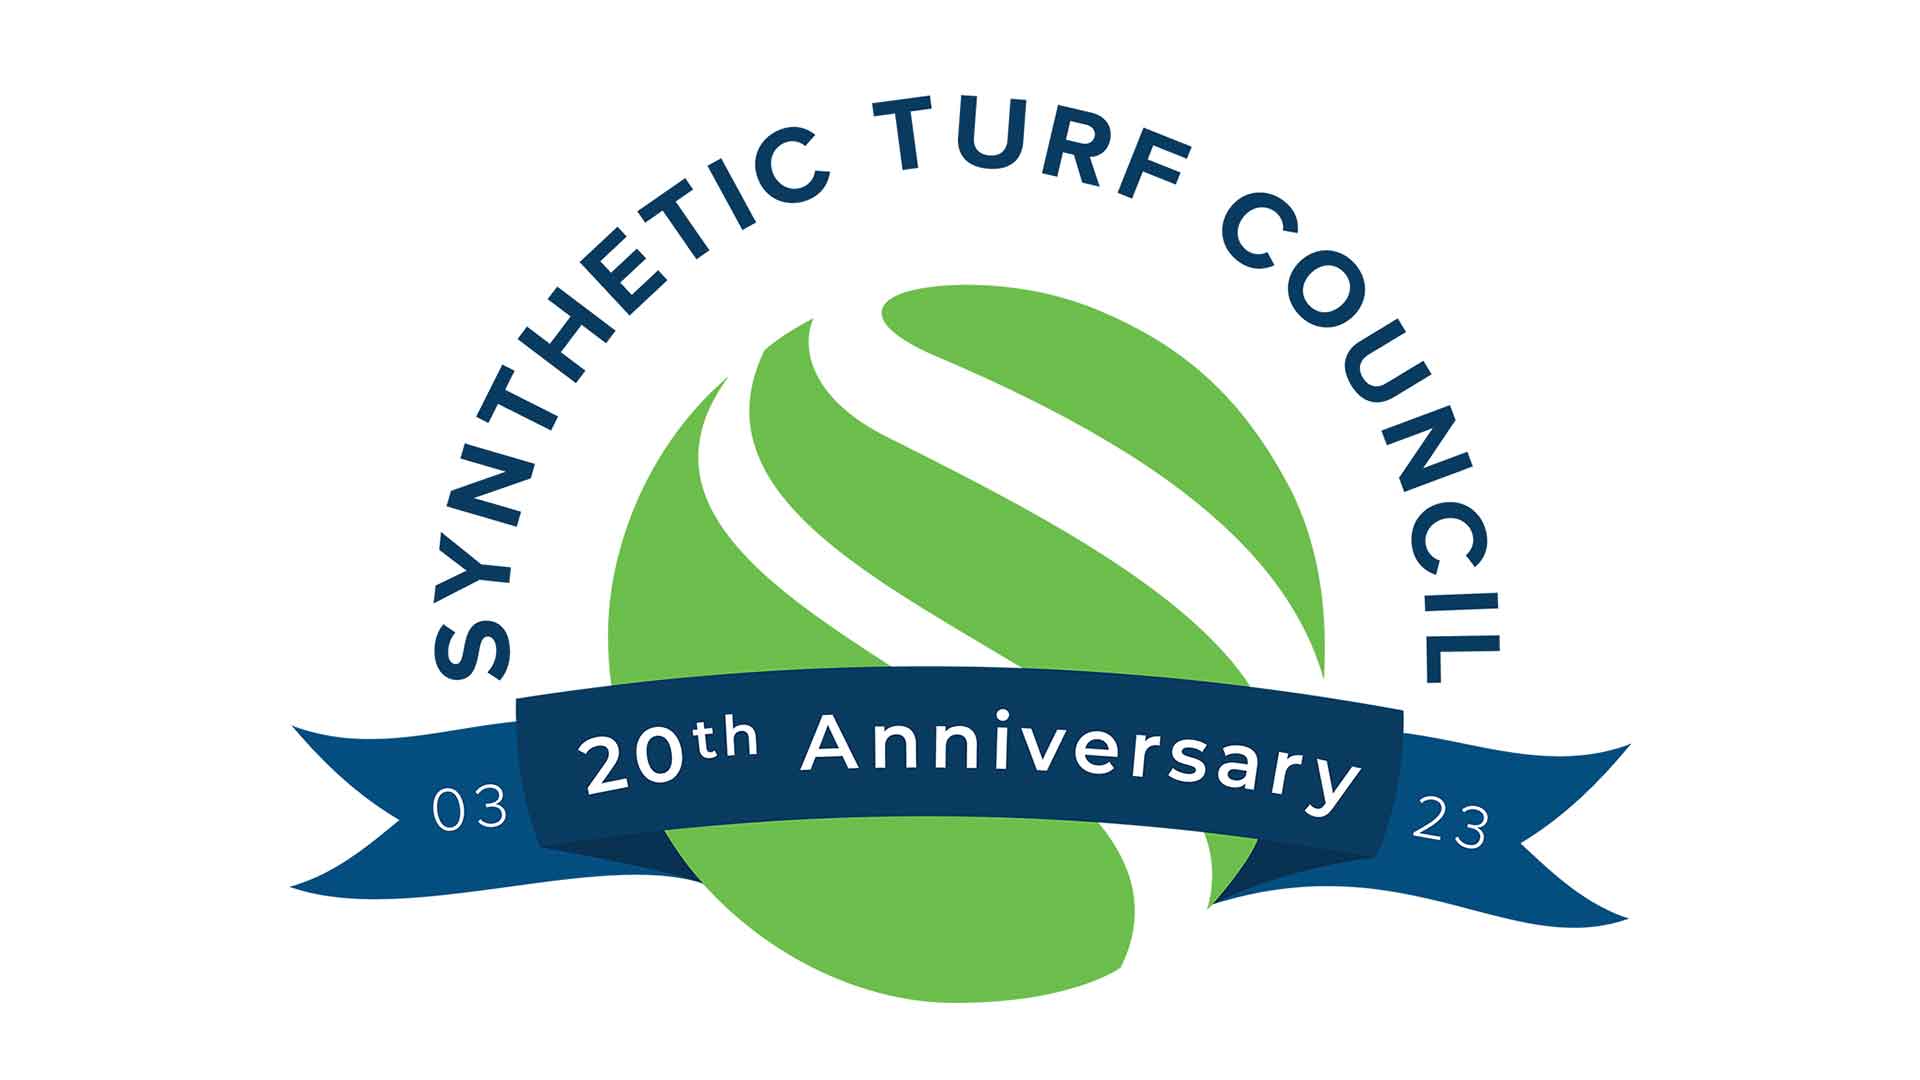 SYNLawn Honored at the Sixth Annual Synthetic Turf Council Awards